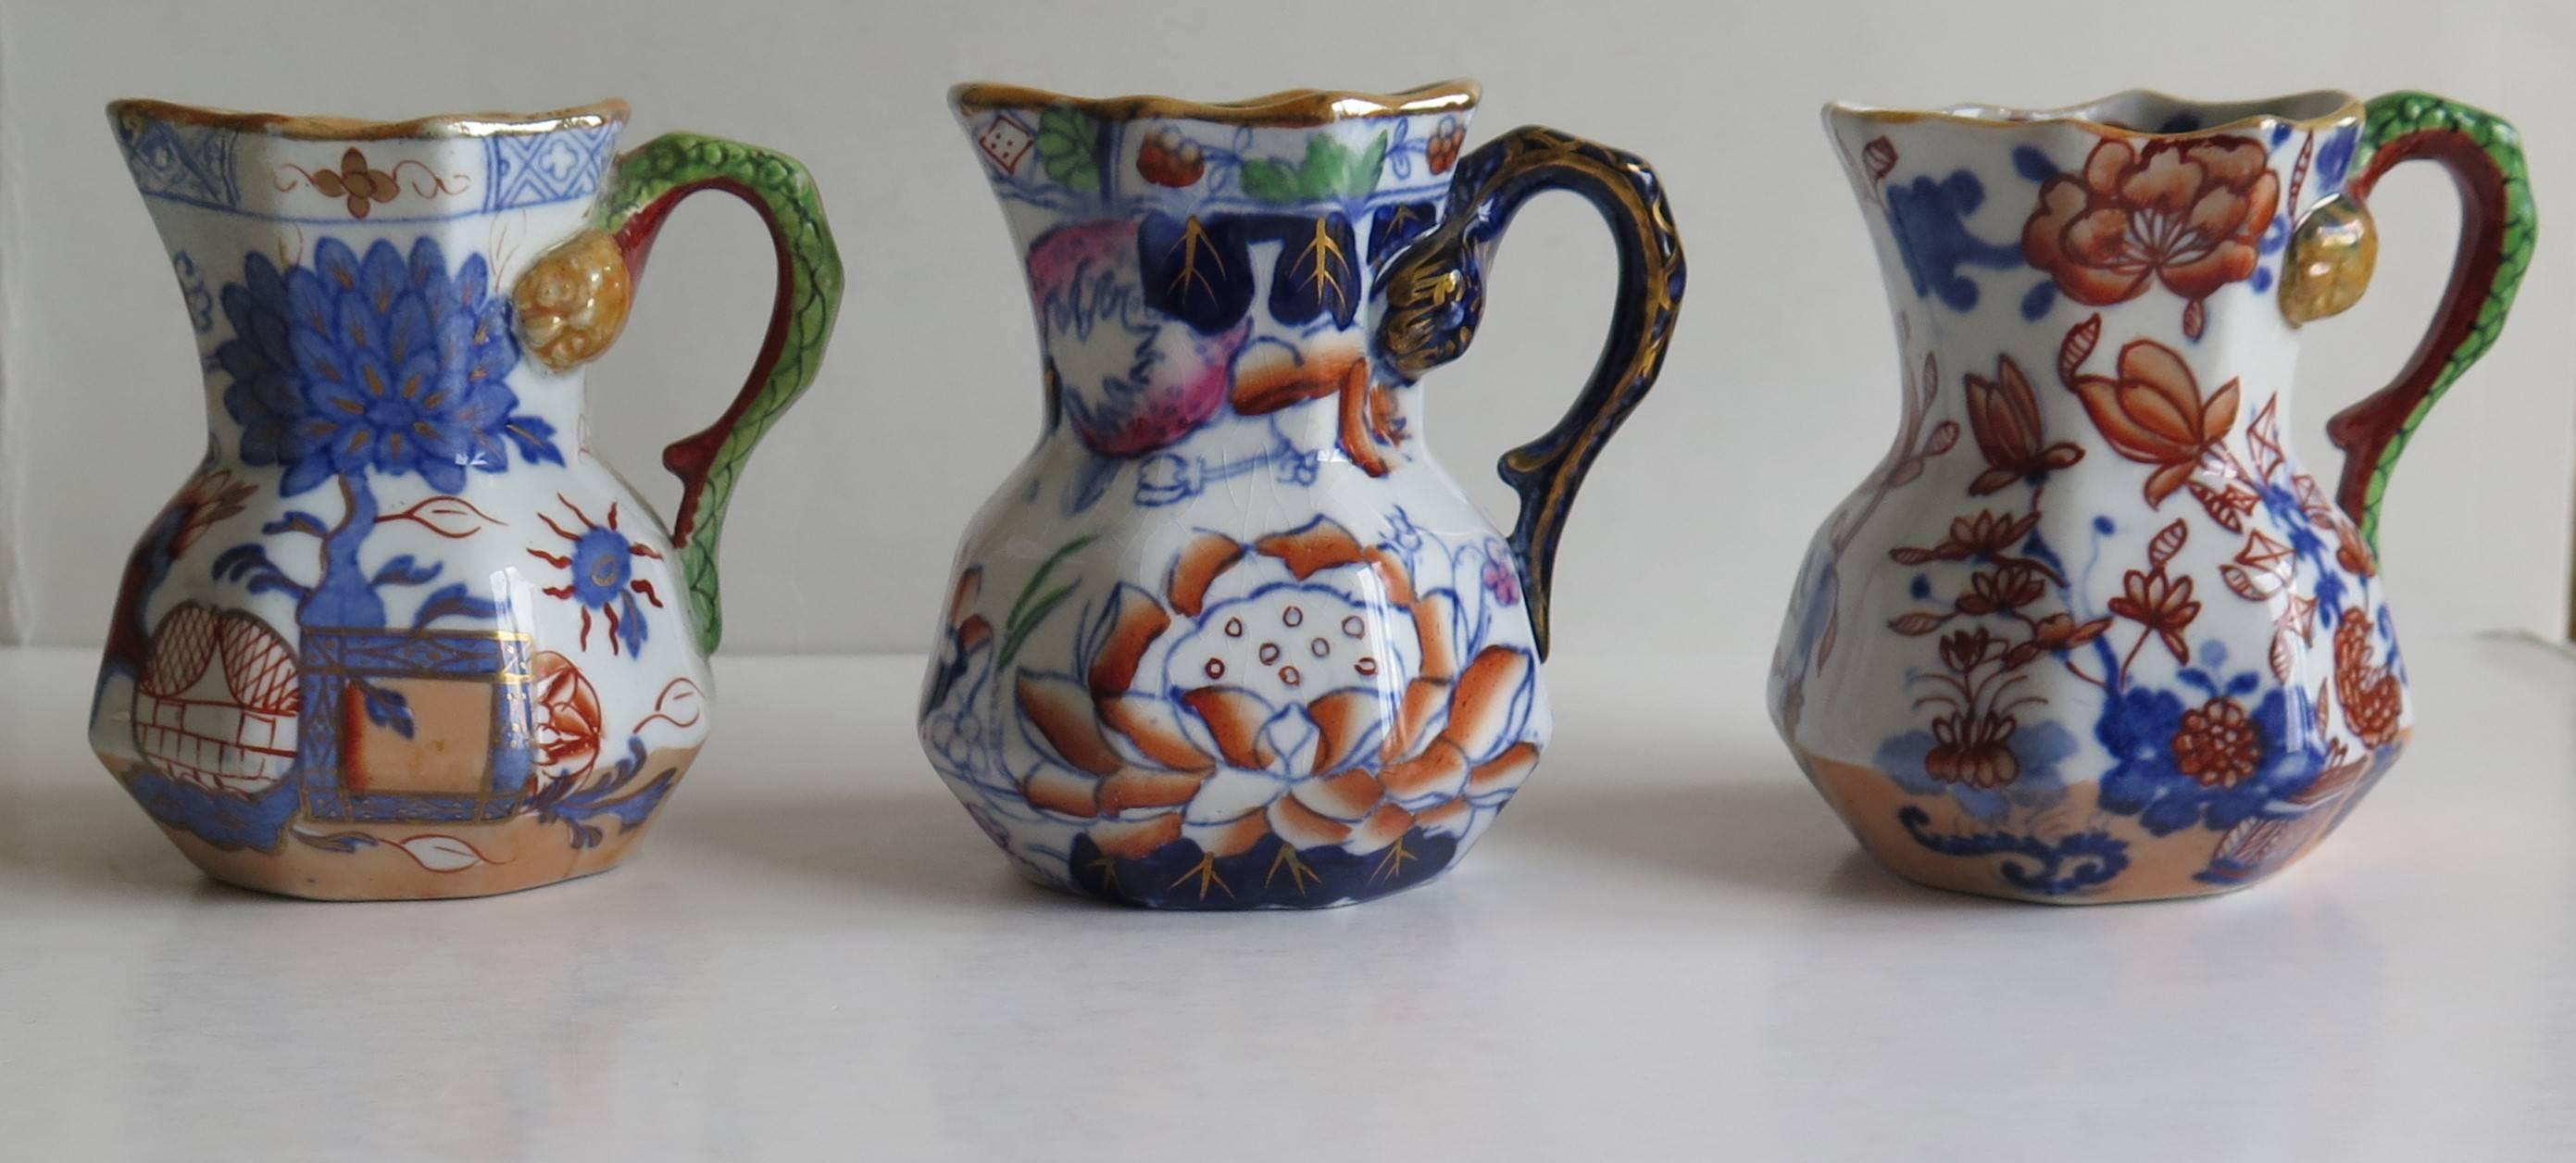 This is a harlequin set of three small Mason's Ironstone jugs or pitchers, all dating to the mid 19th Century.

Very small Mason's jugs or pitchers tend to be rare.

These jugs have the octagonal Hydra shape with a snake handle, all dating to the